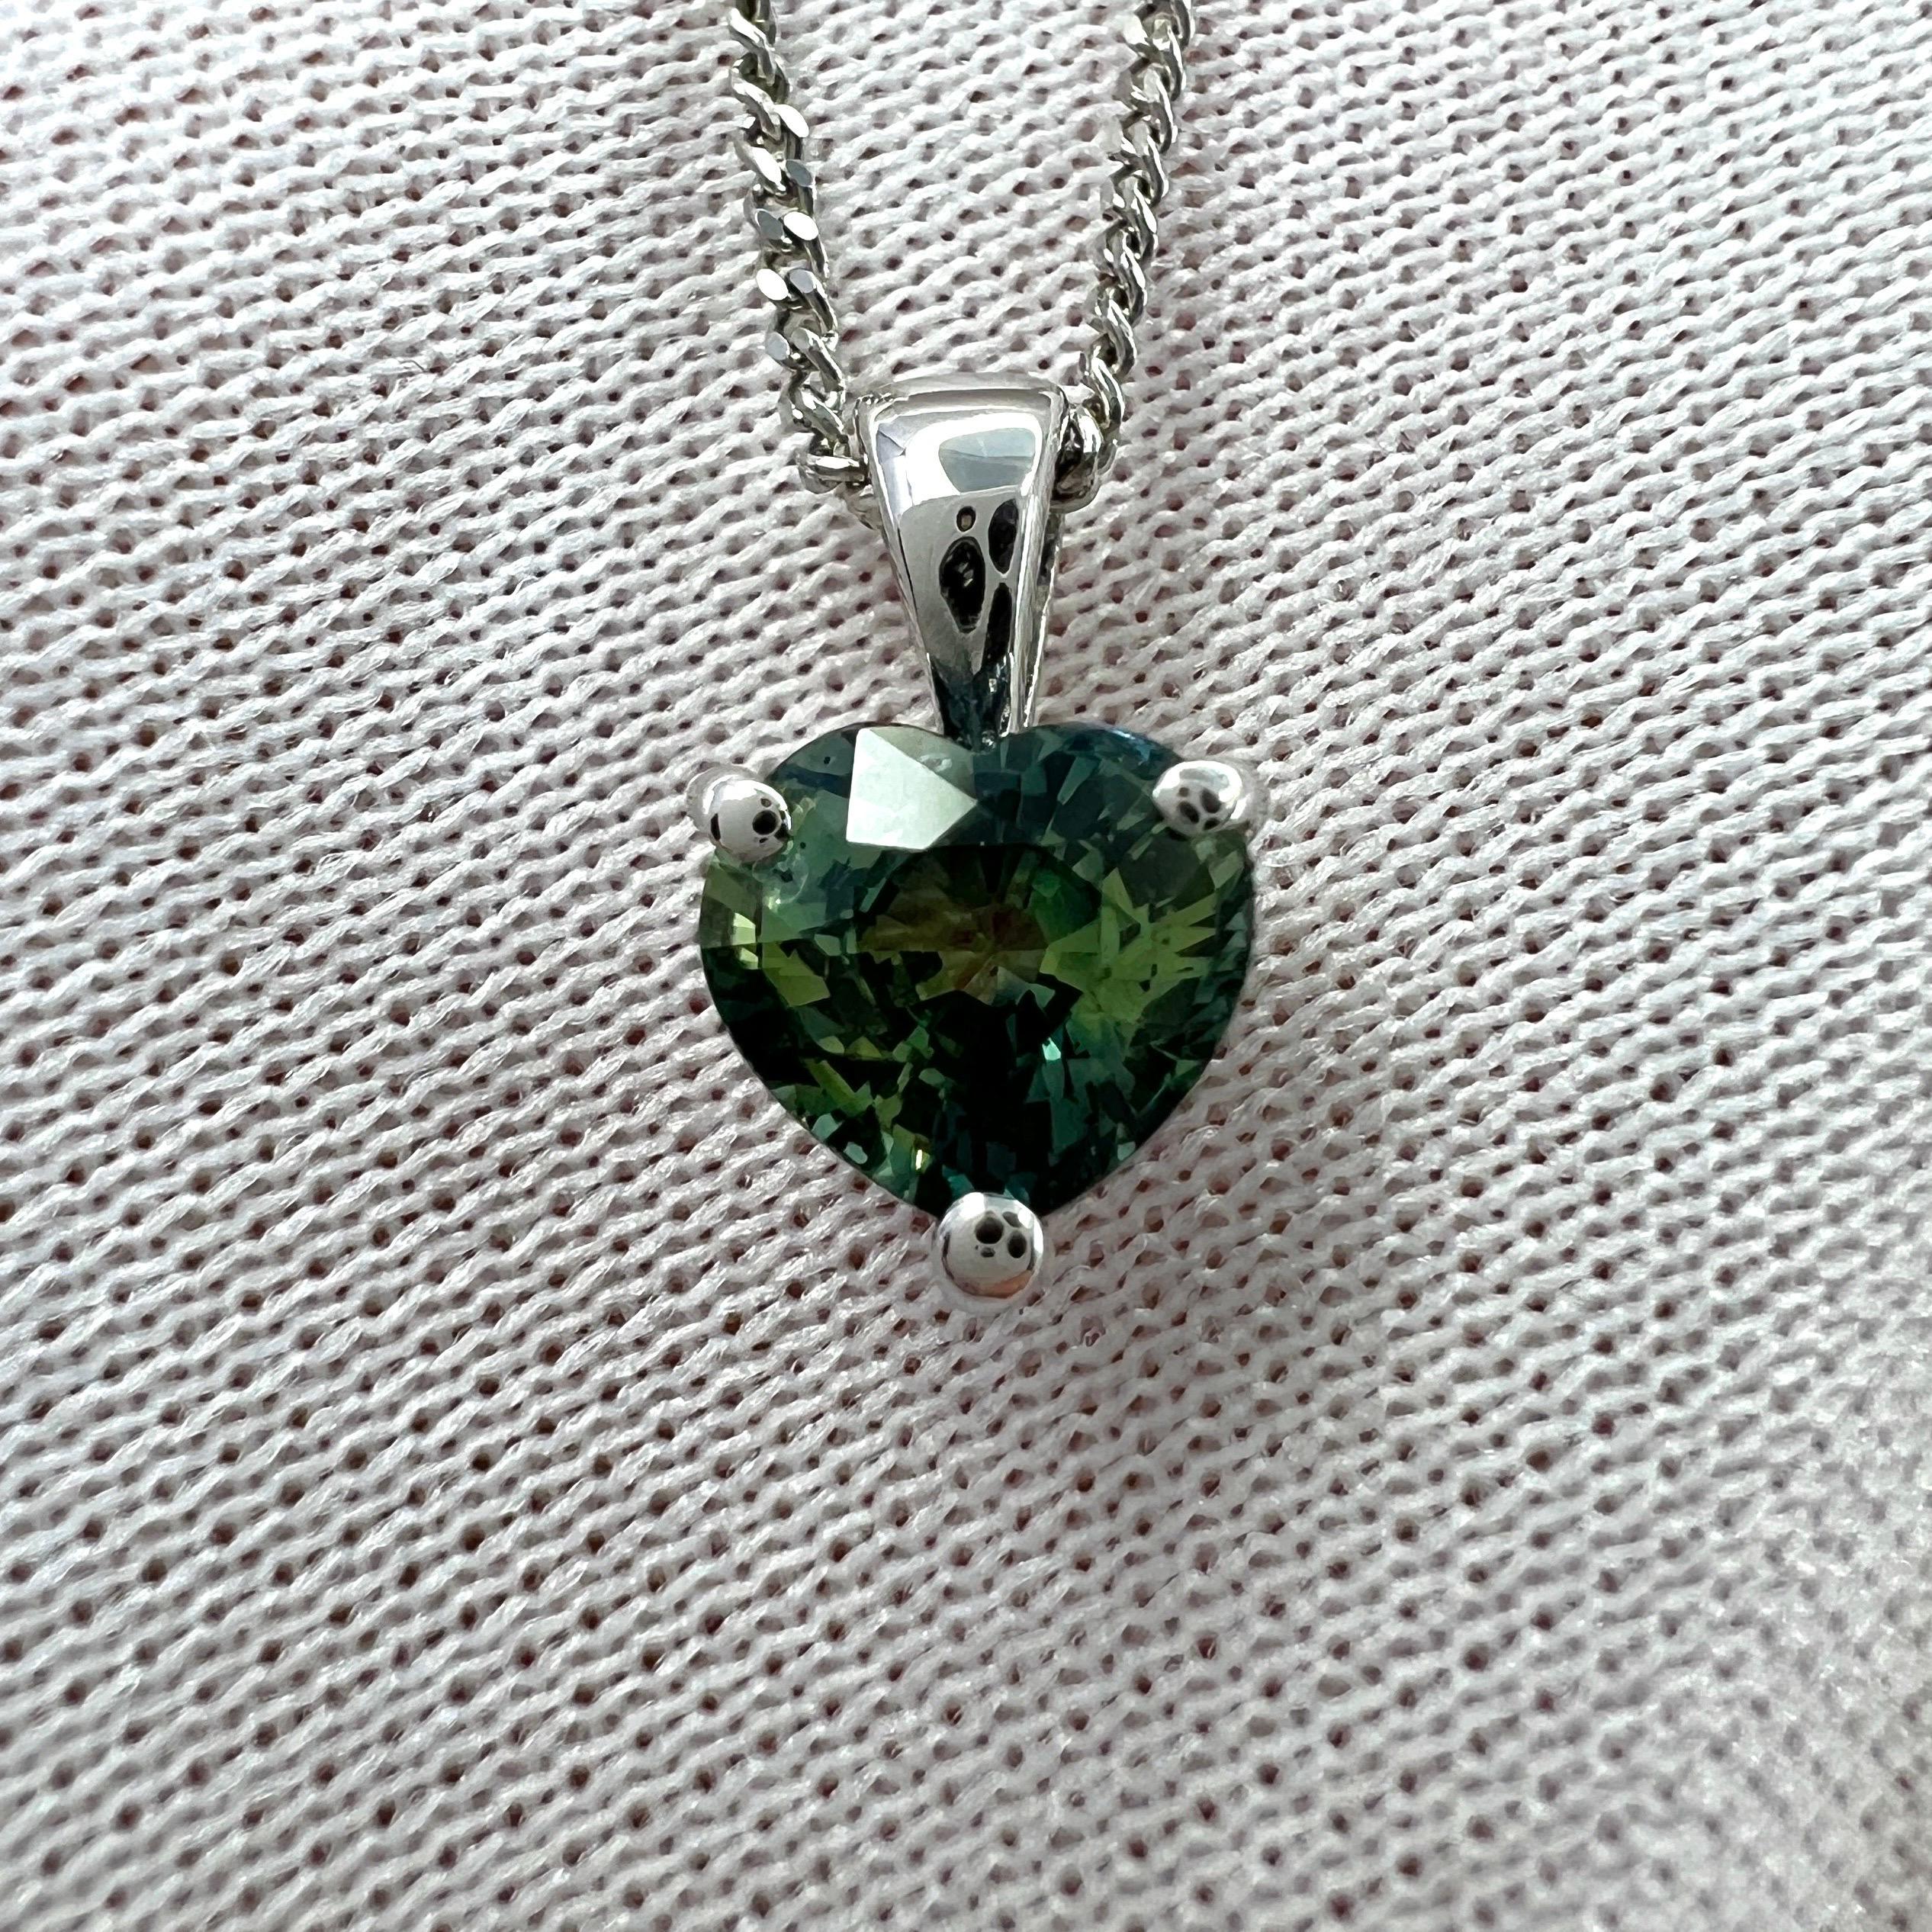 Untreated Heart Cut Colour Change Sapphire 18k White Gold Solitaire Pendant Necklace.

A fine IGI certified 1.06 carat untreated sapphire with stunning colour change effect. 
Changing colour depending on the light its viewed in. Very rare for